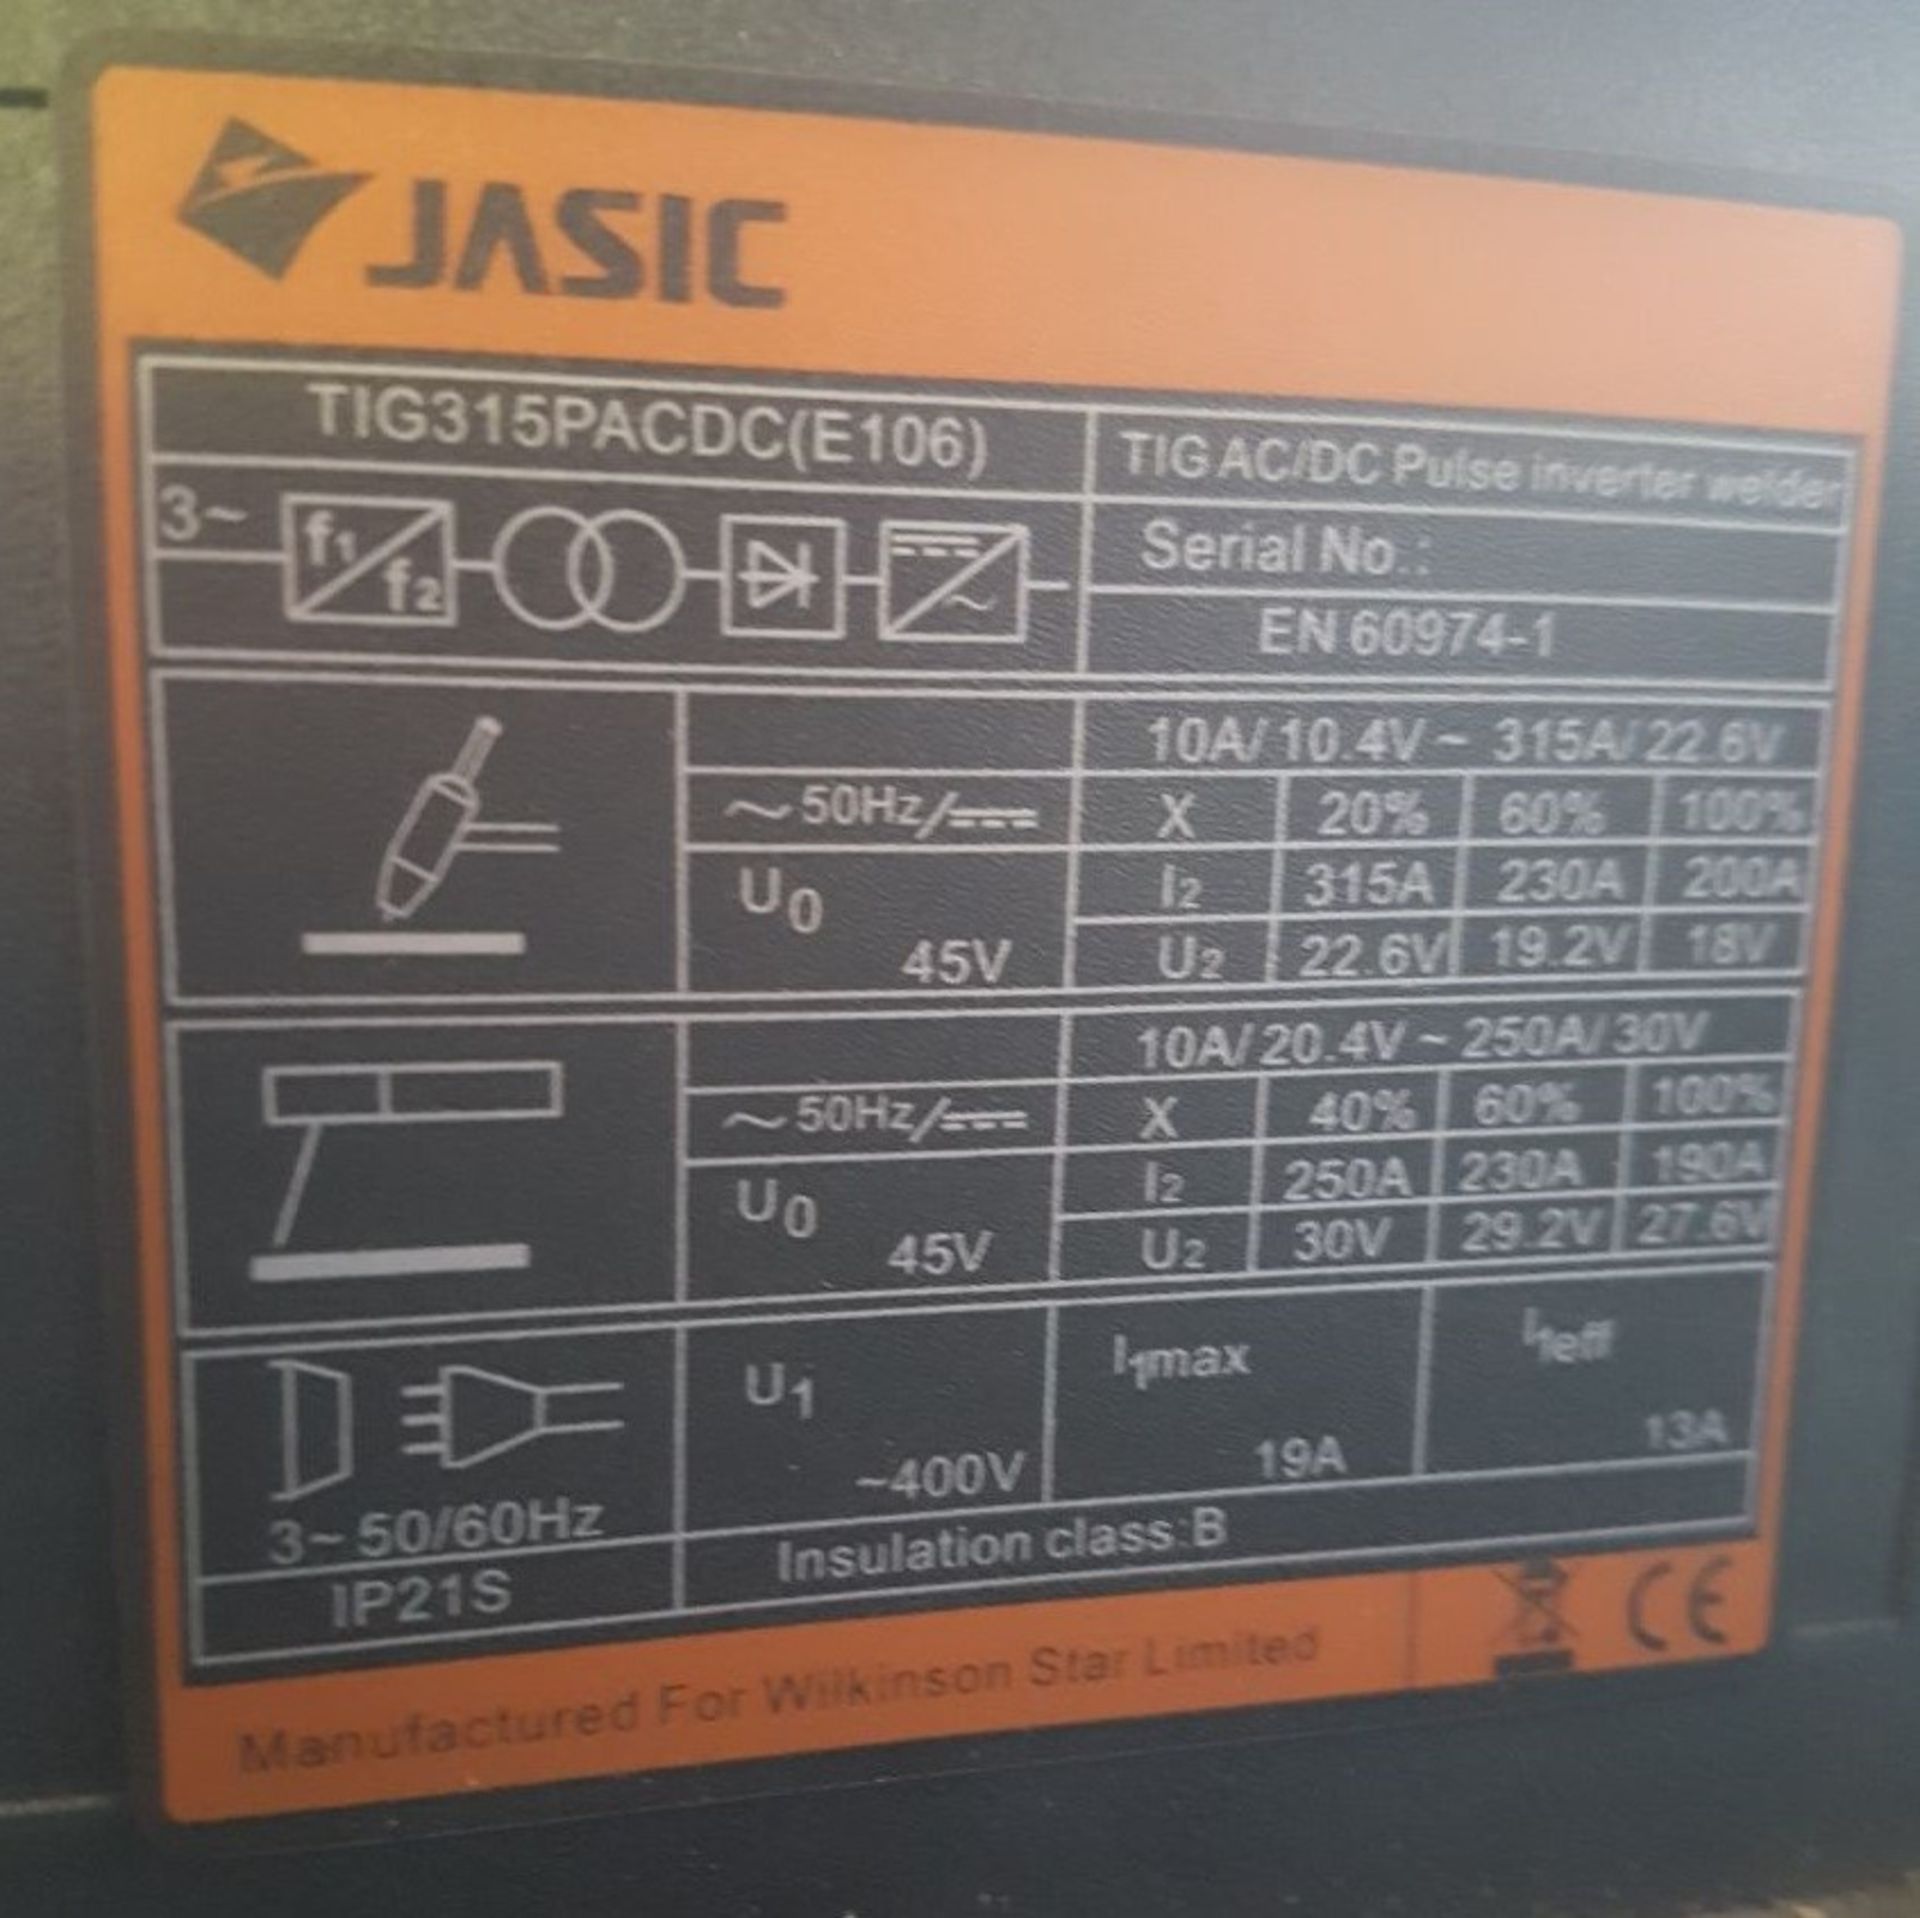 JASIC, 315P TIG MMA DC & AC Digital Welder with Integrated Water Cooler - Image 9 of 11